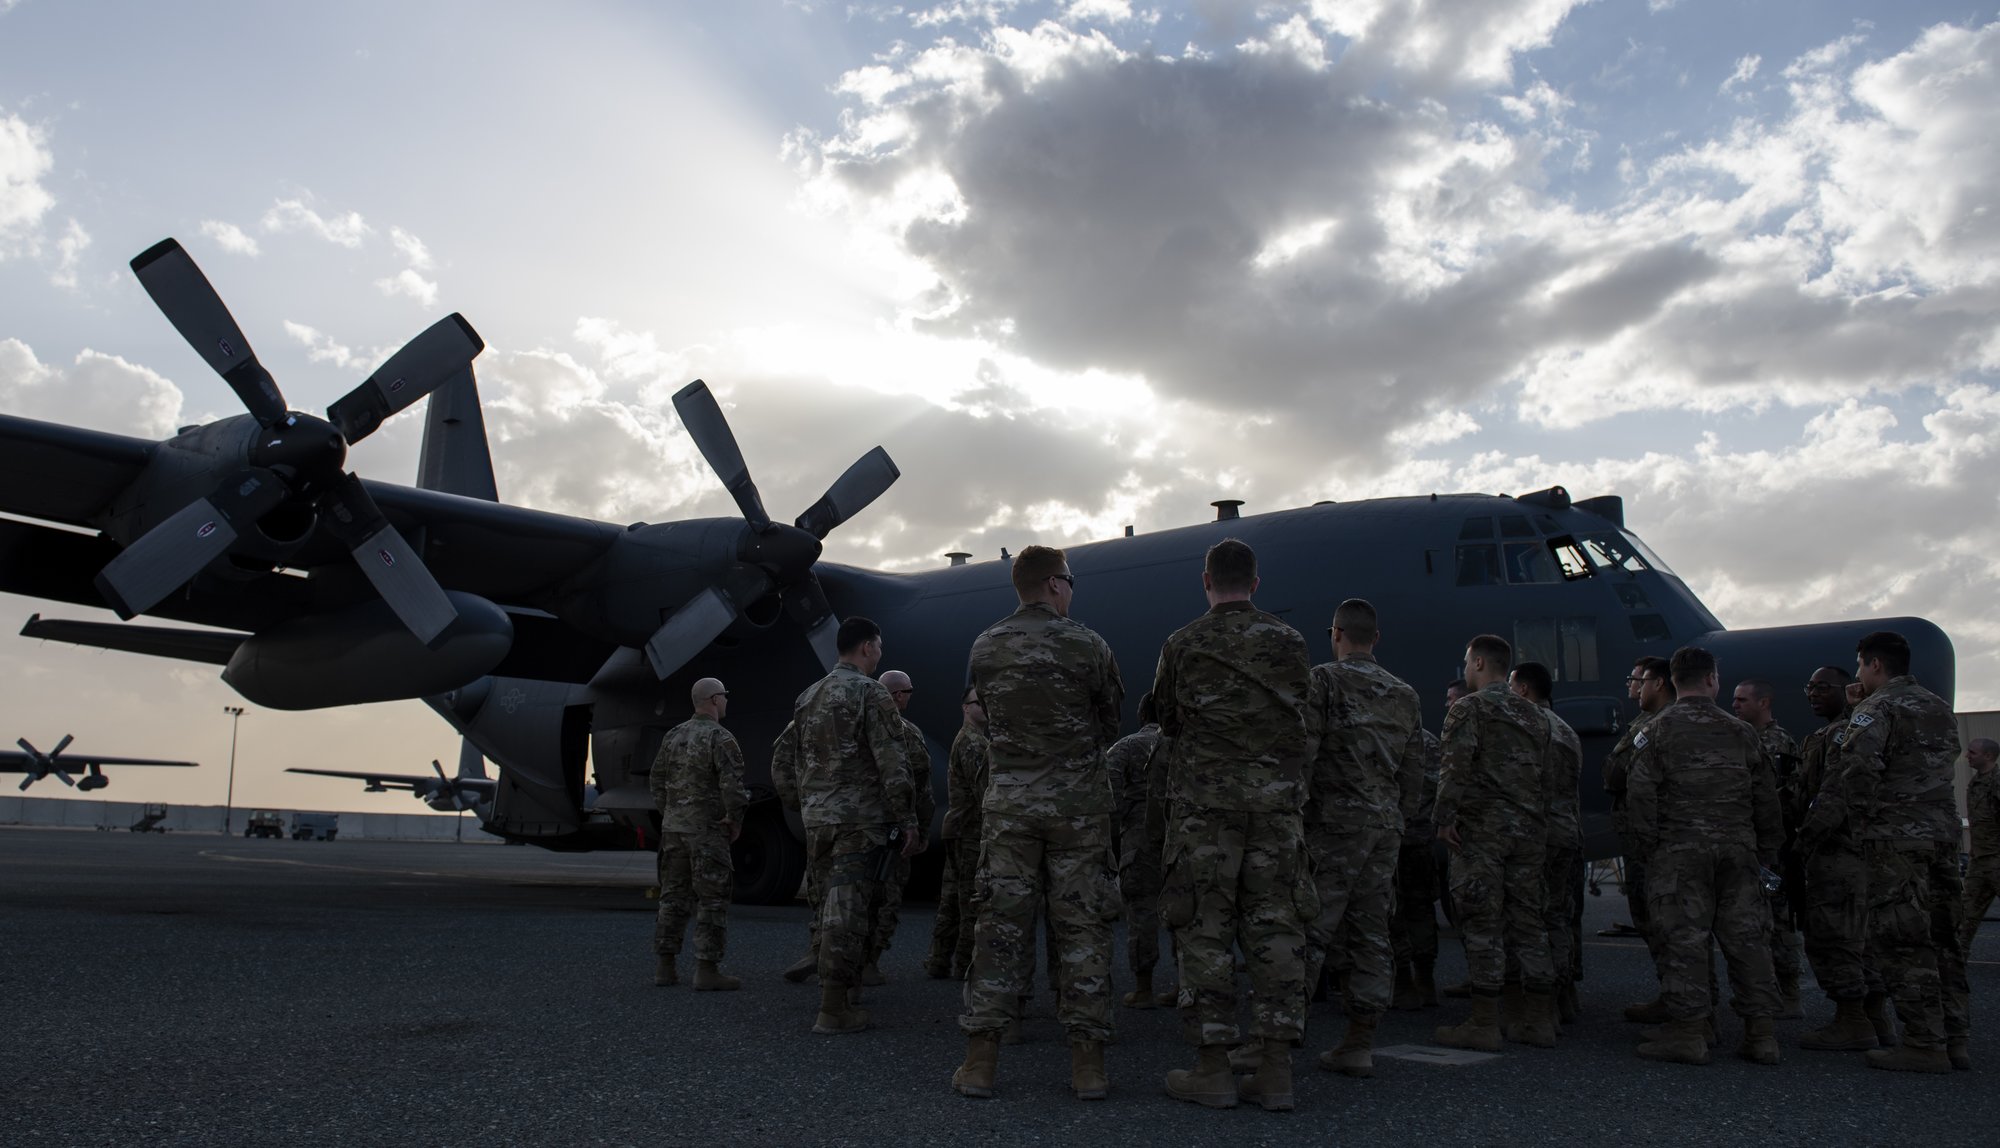 A group of airmen tour an MC-130 Combat Talon II, assigned to Hurlburt Field, Florida, during a Midnight Marauders immersion at Ali Al Salem Air Base, Kuwait, March 14, 2020. The Midnight Marauder program has visited multiple units in an effort for airmen to see different aspects of the overall mission of ASAB. US Air Force photo by Senior Airman Kevin Tanenbaum.